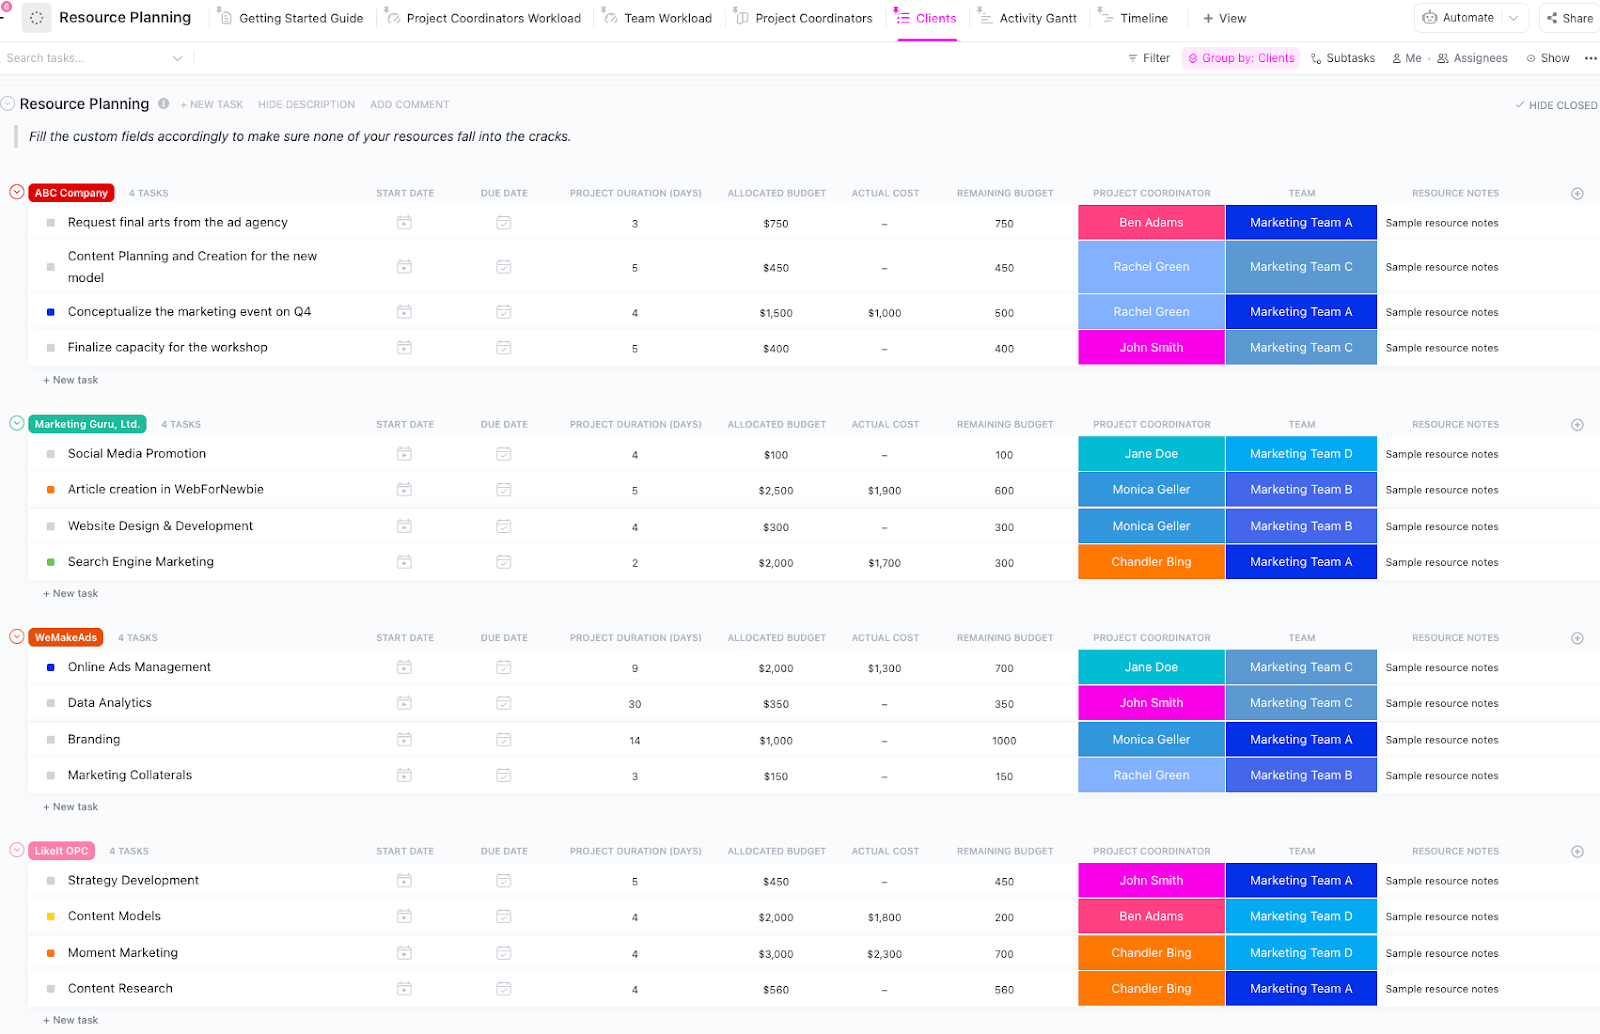 Capacity Planning List Template by ClickUp